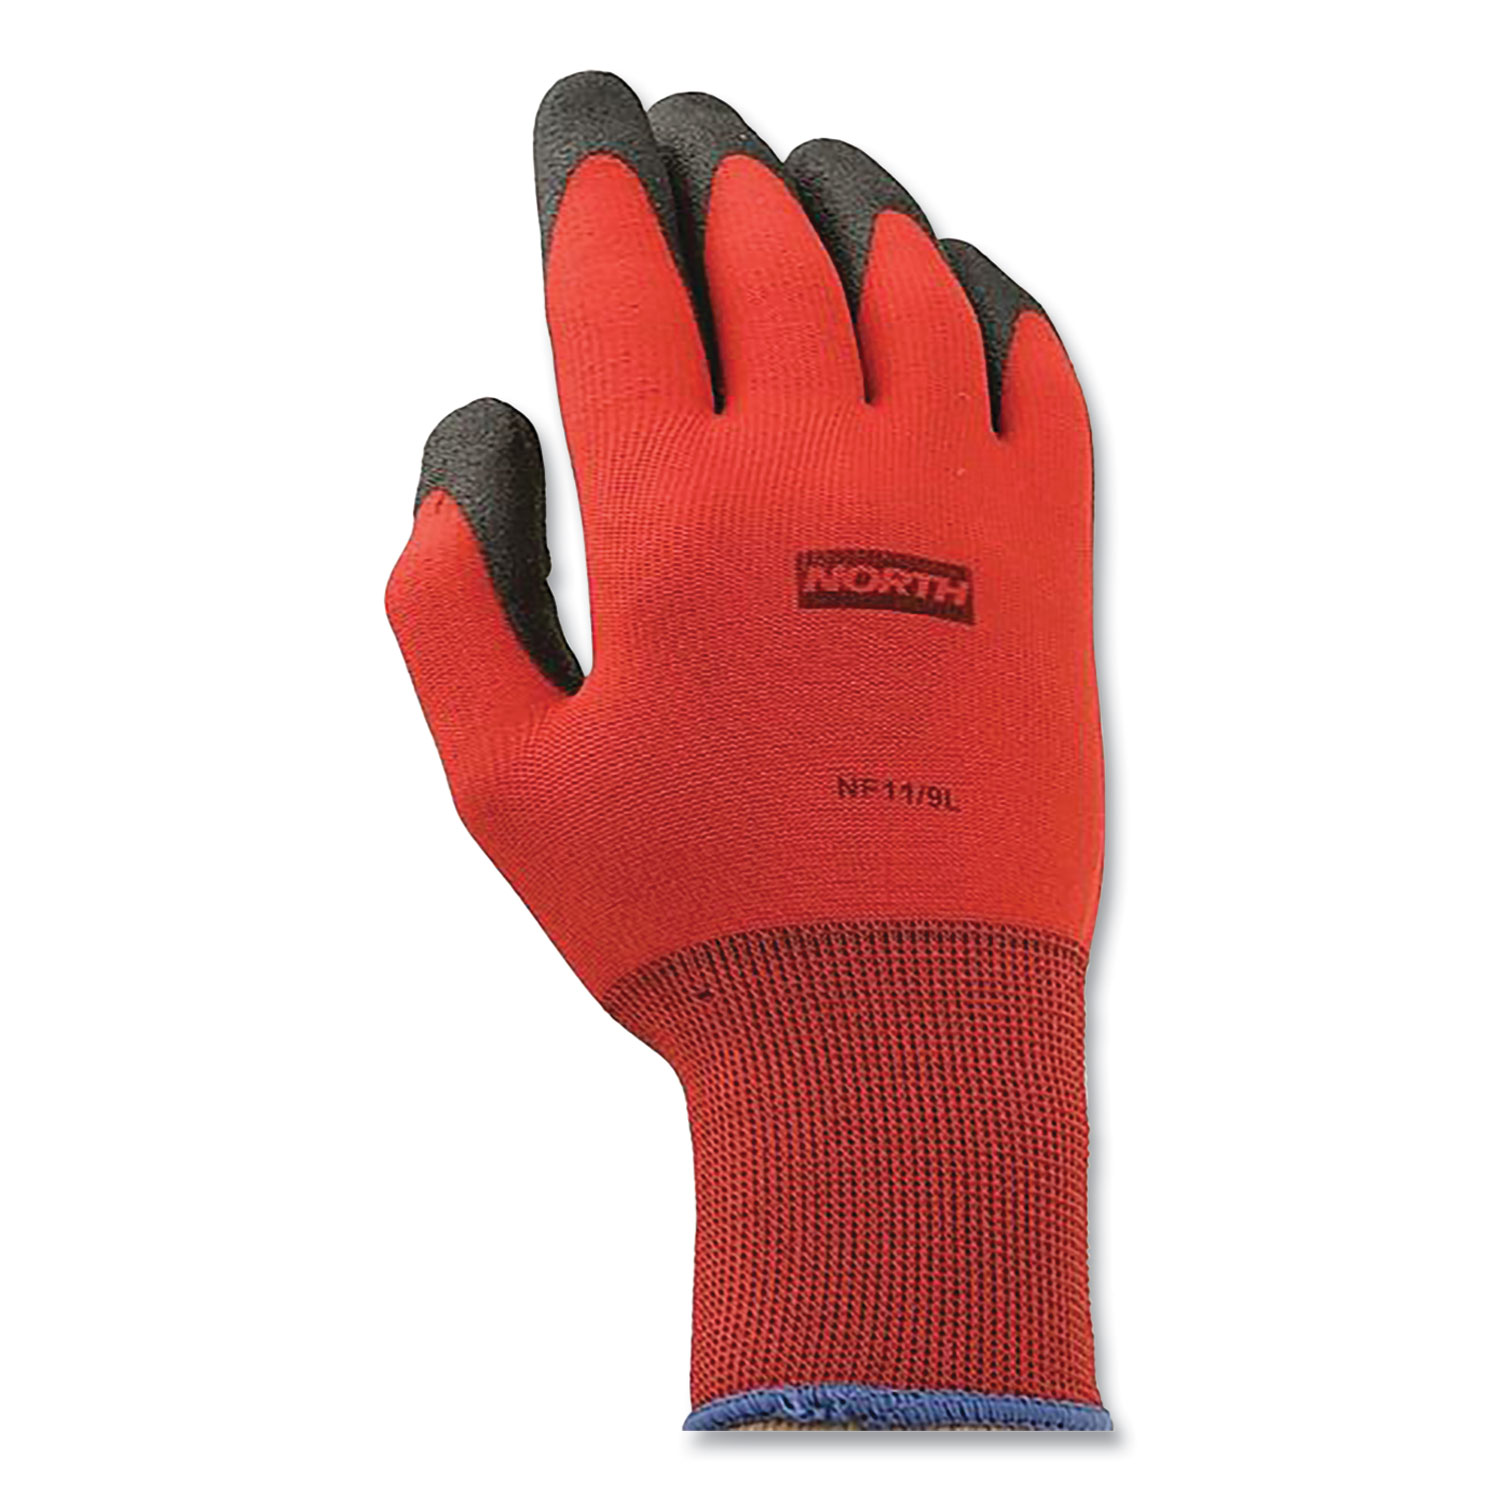 North Safety® NorthFlex Red Foamed PVC Gloves, Large, Red/Black, 12 Pairs